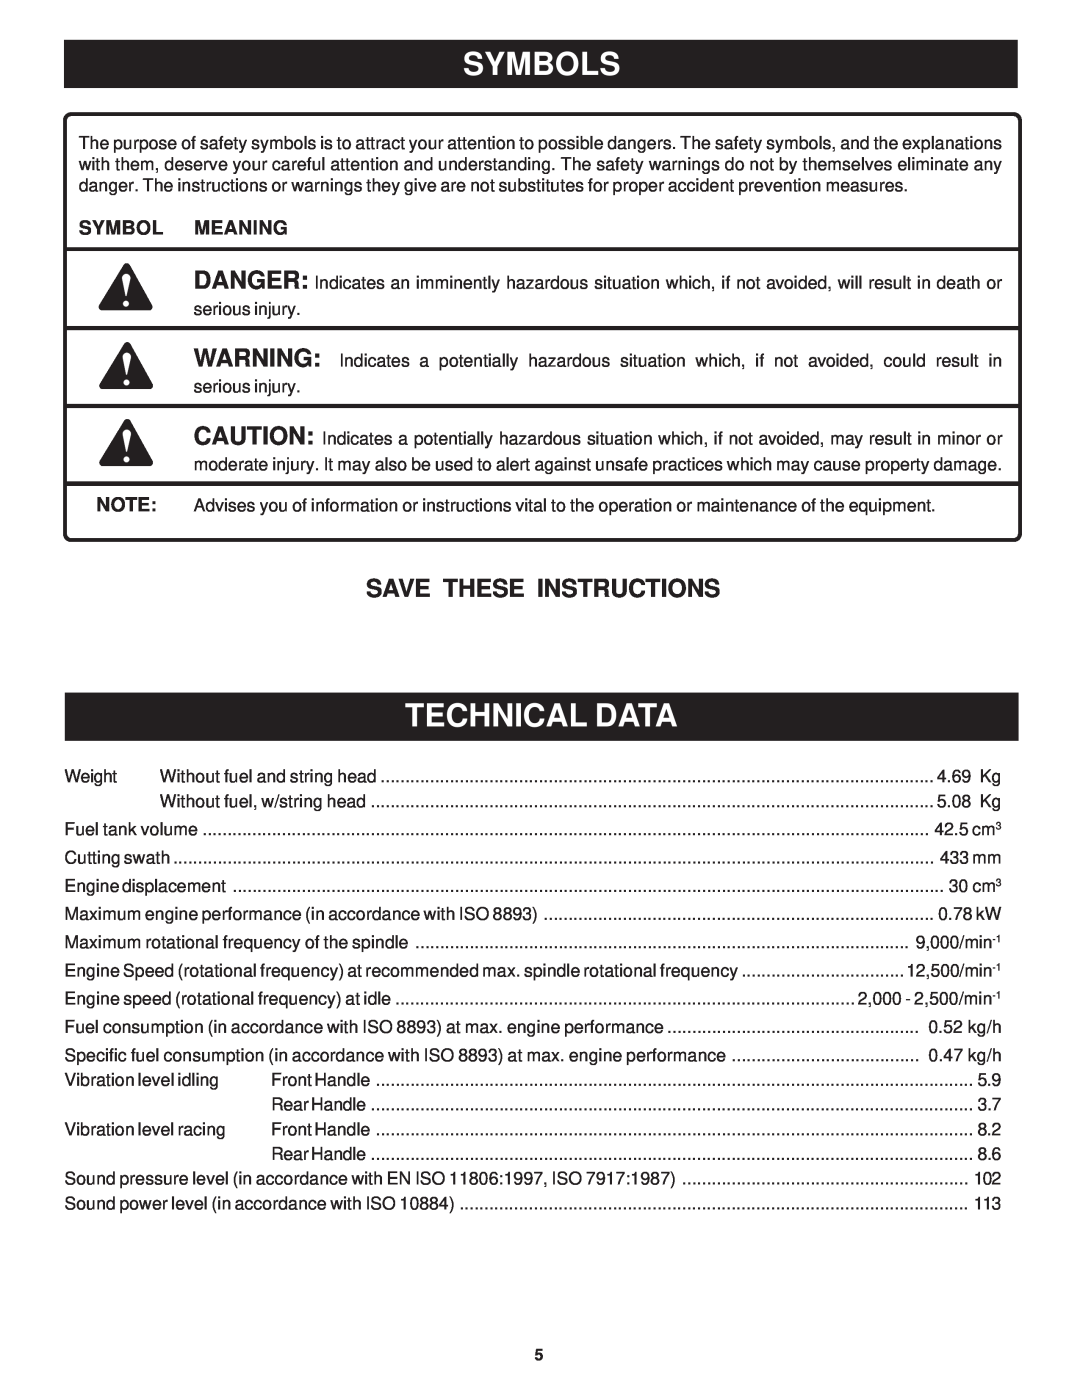 Ryobi Outdoor PLT3043E, RY70103 manual Technical Data, Symbols, Save These Instructions, Symbol Meaning 